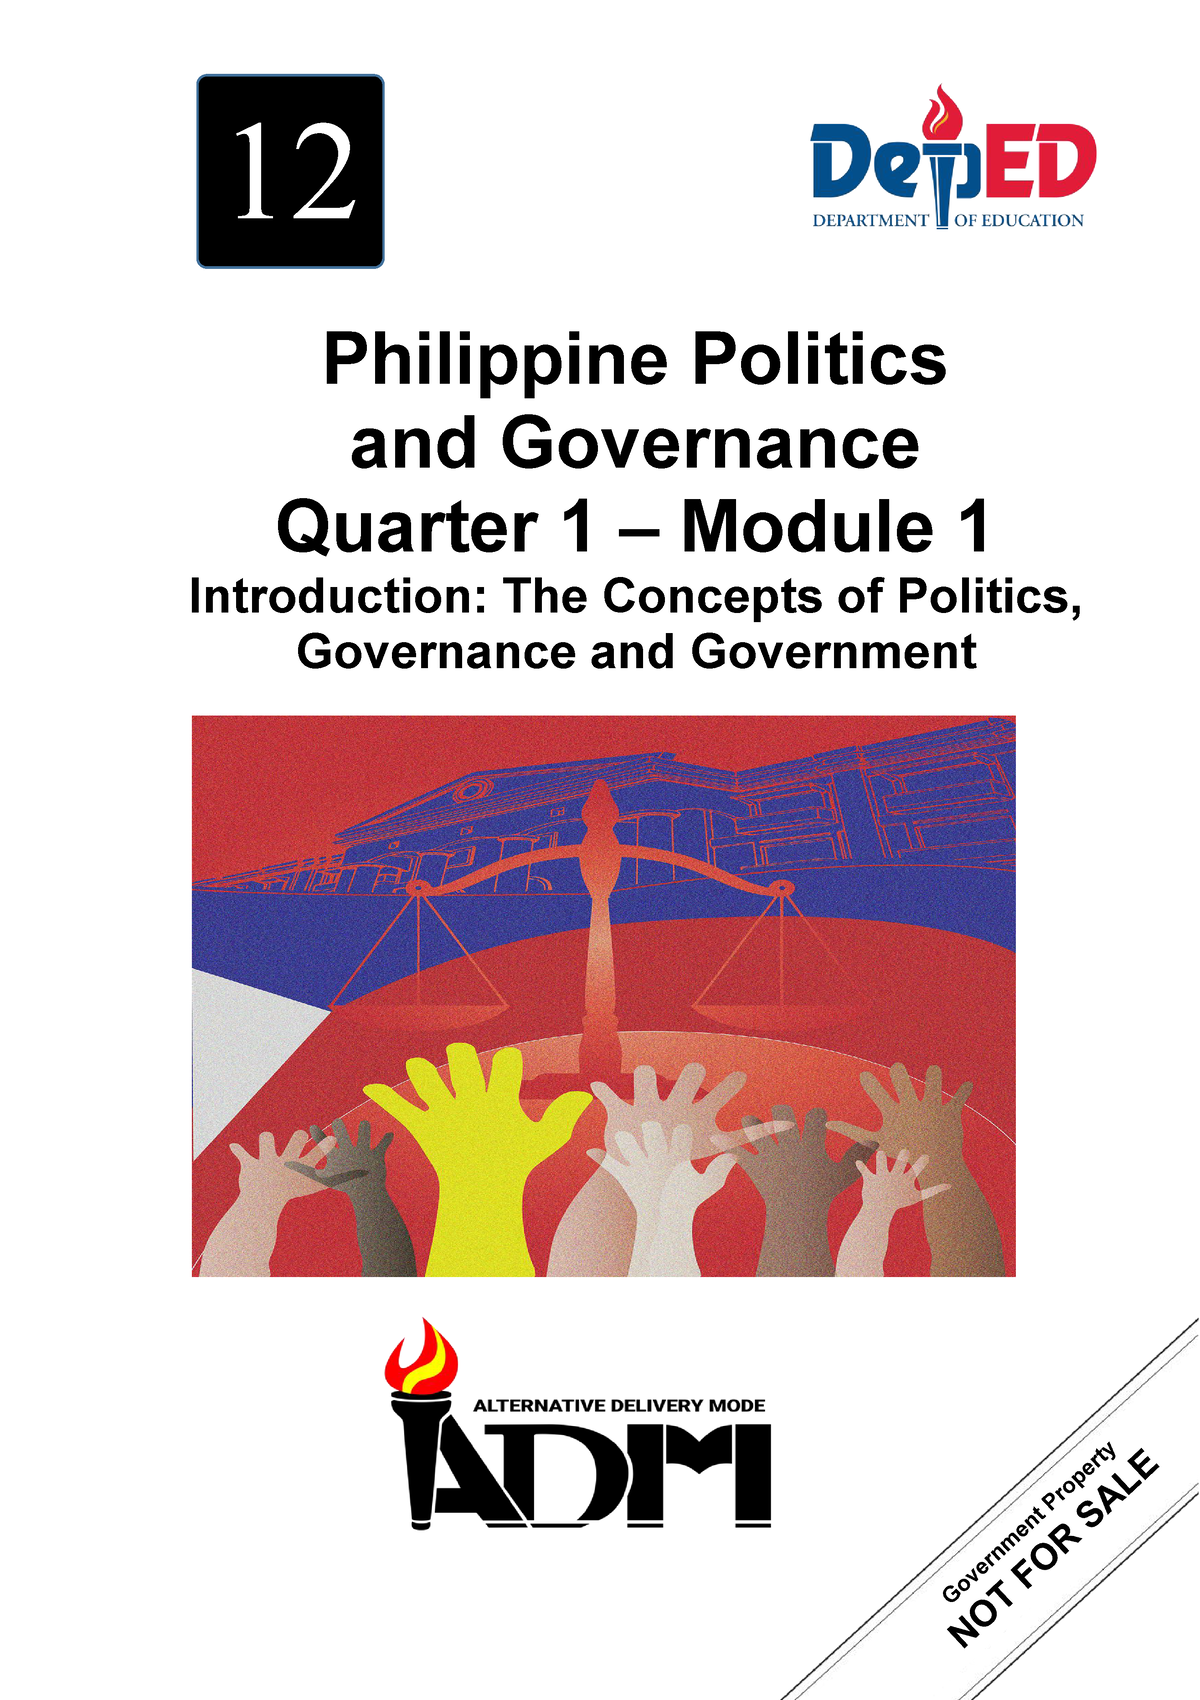 Ap 12 Q1 Mod1 Introduction The Concepts Of Politics Governance And Government 12 Philippine 9362